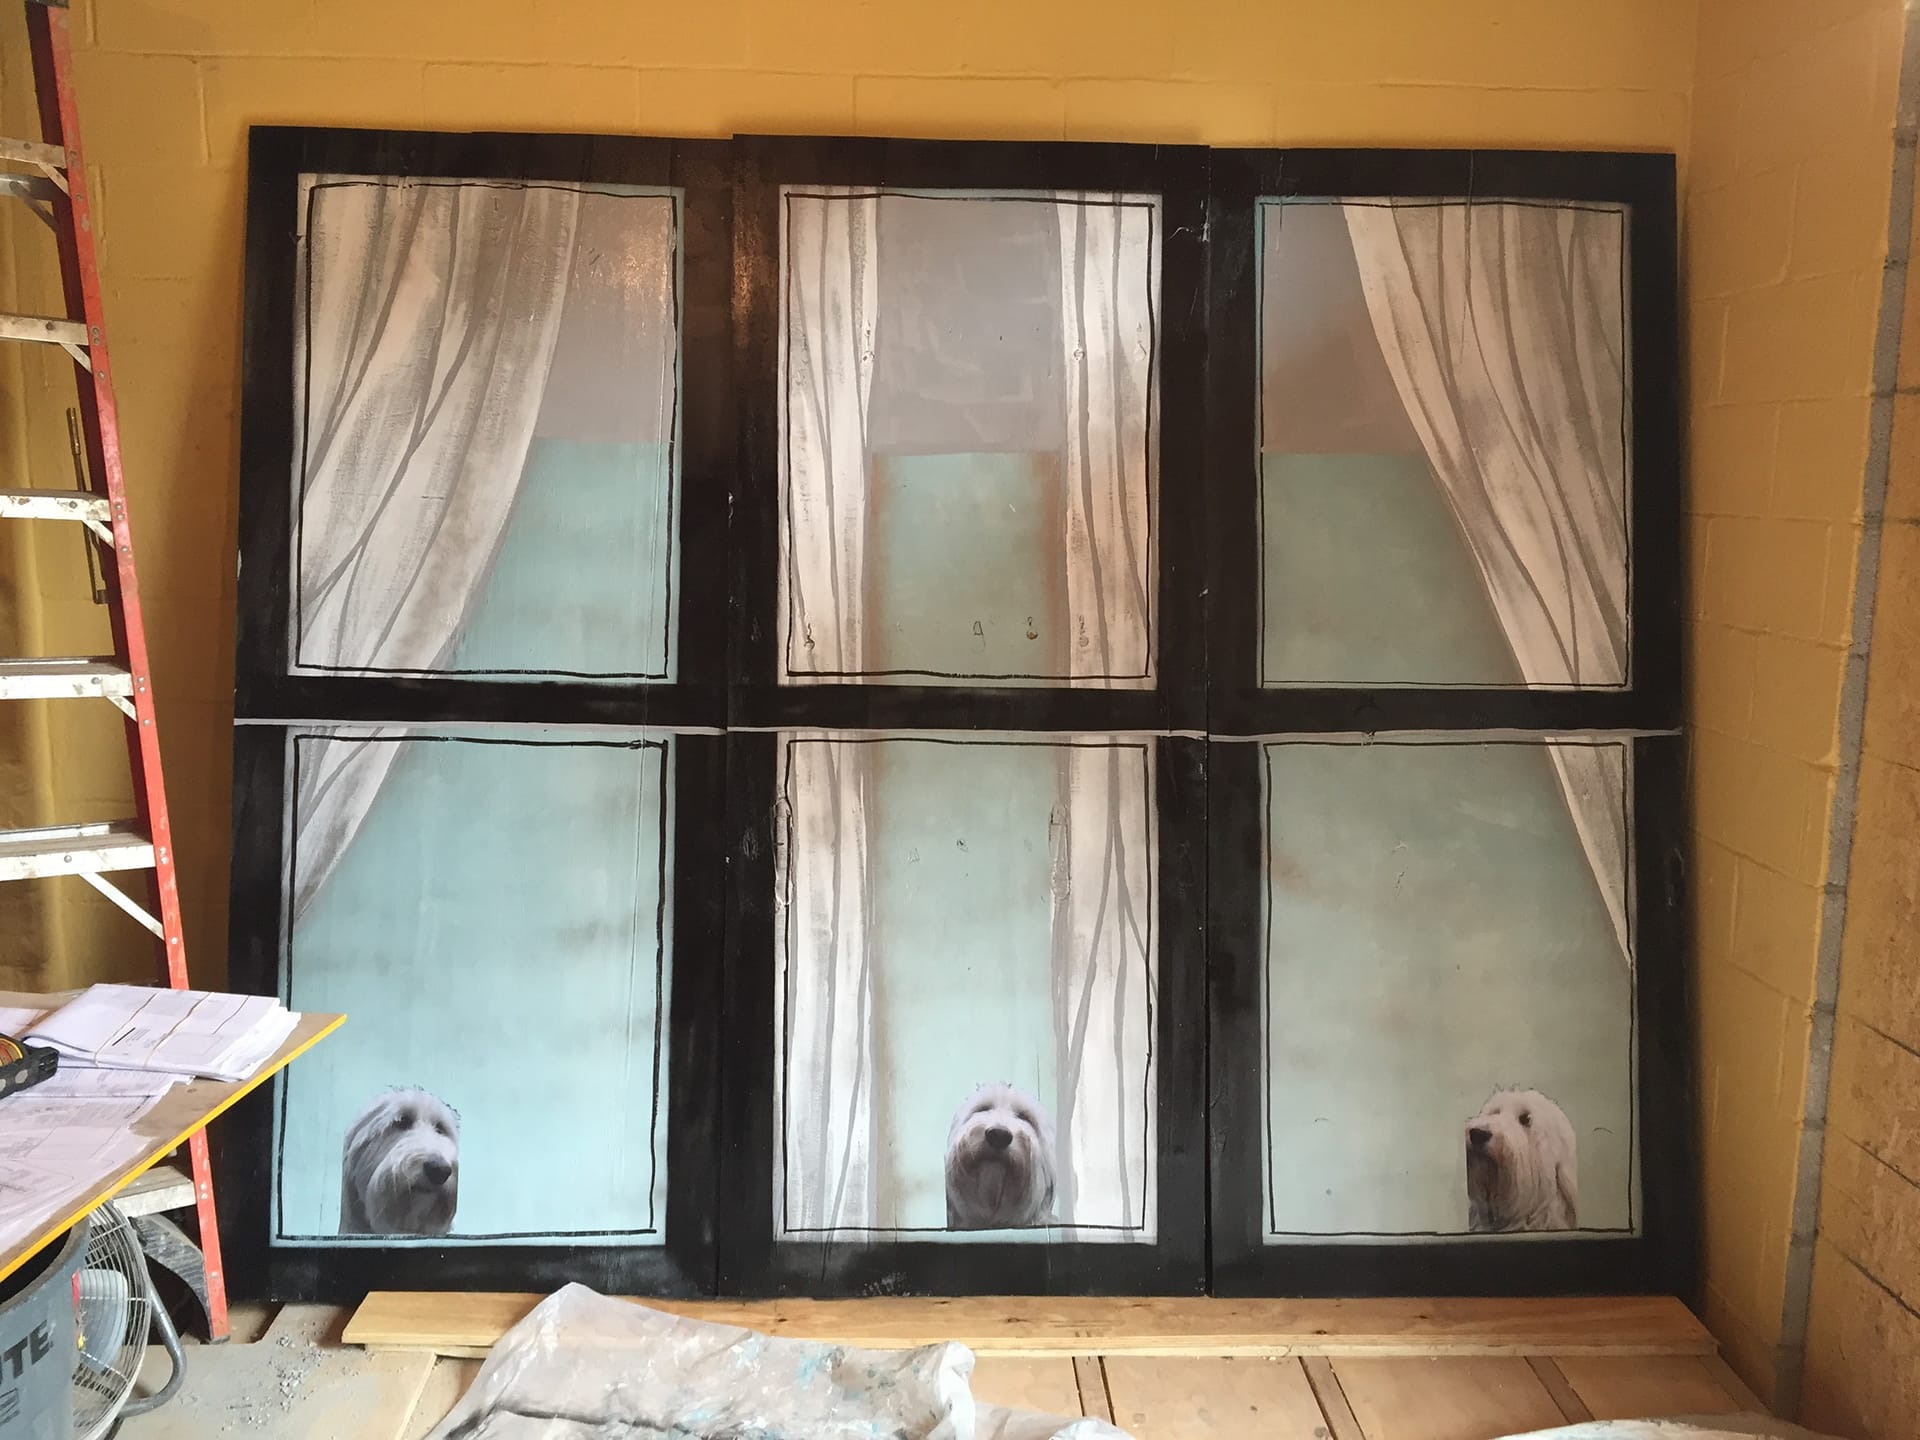 Three wood boards painted with faux windows, curtains, and an image of a dog looking out of each fake window.